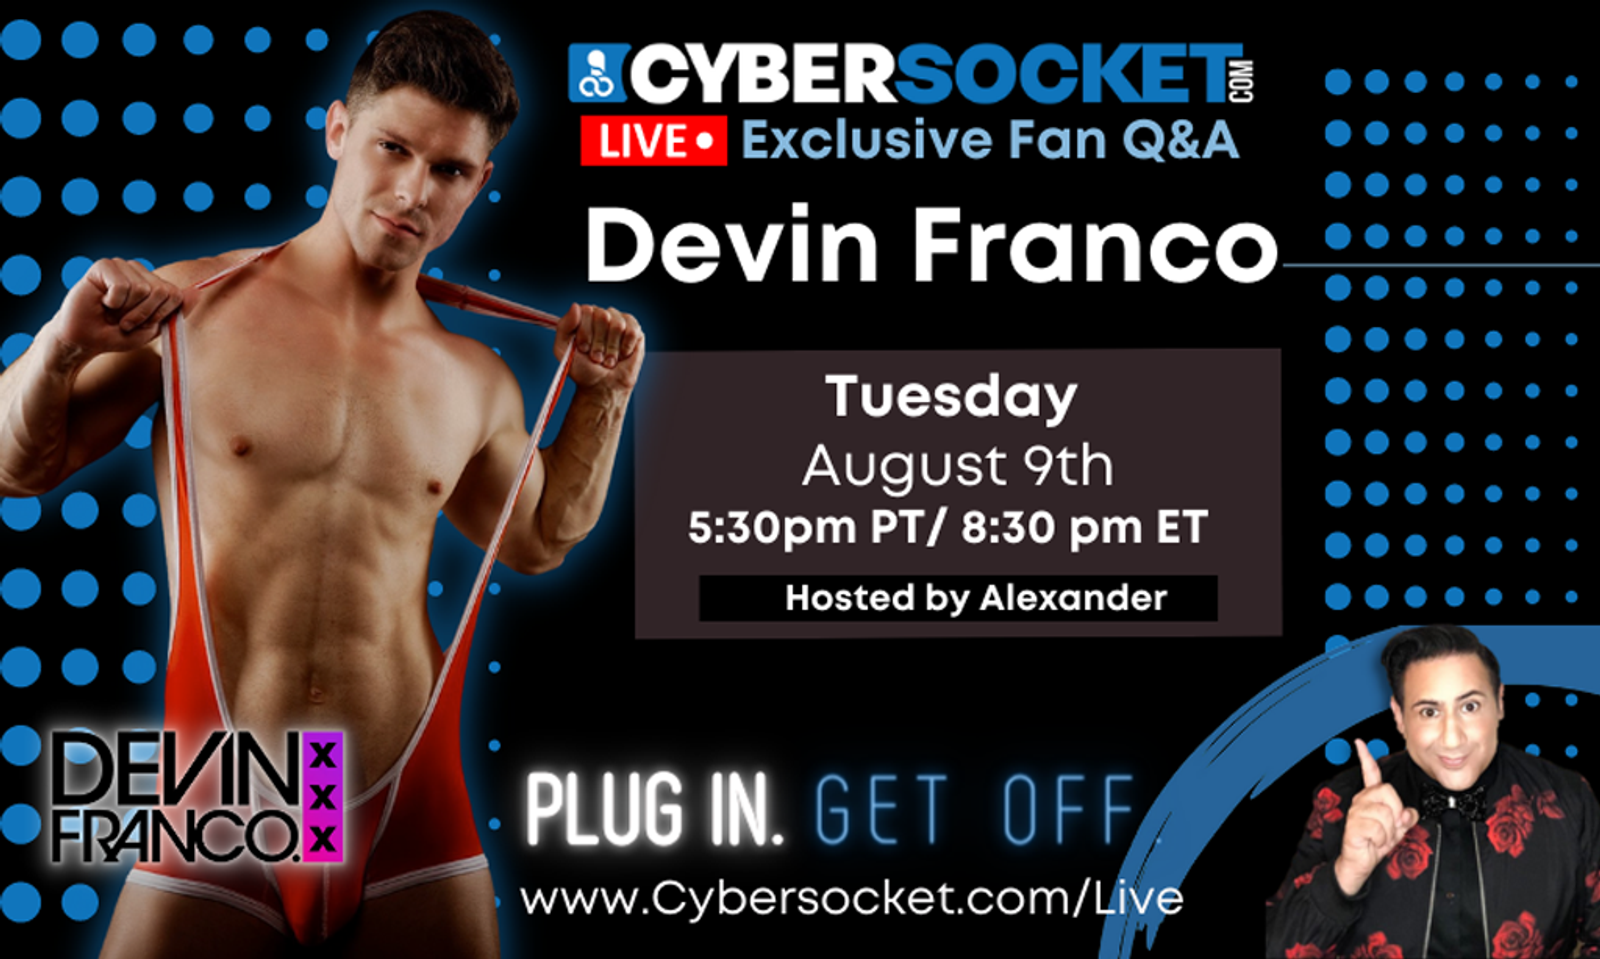 Cybersocket to Host Exclusive Fan Q&A With Devin Franco August 9